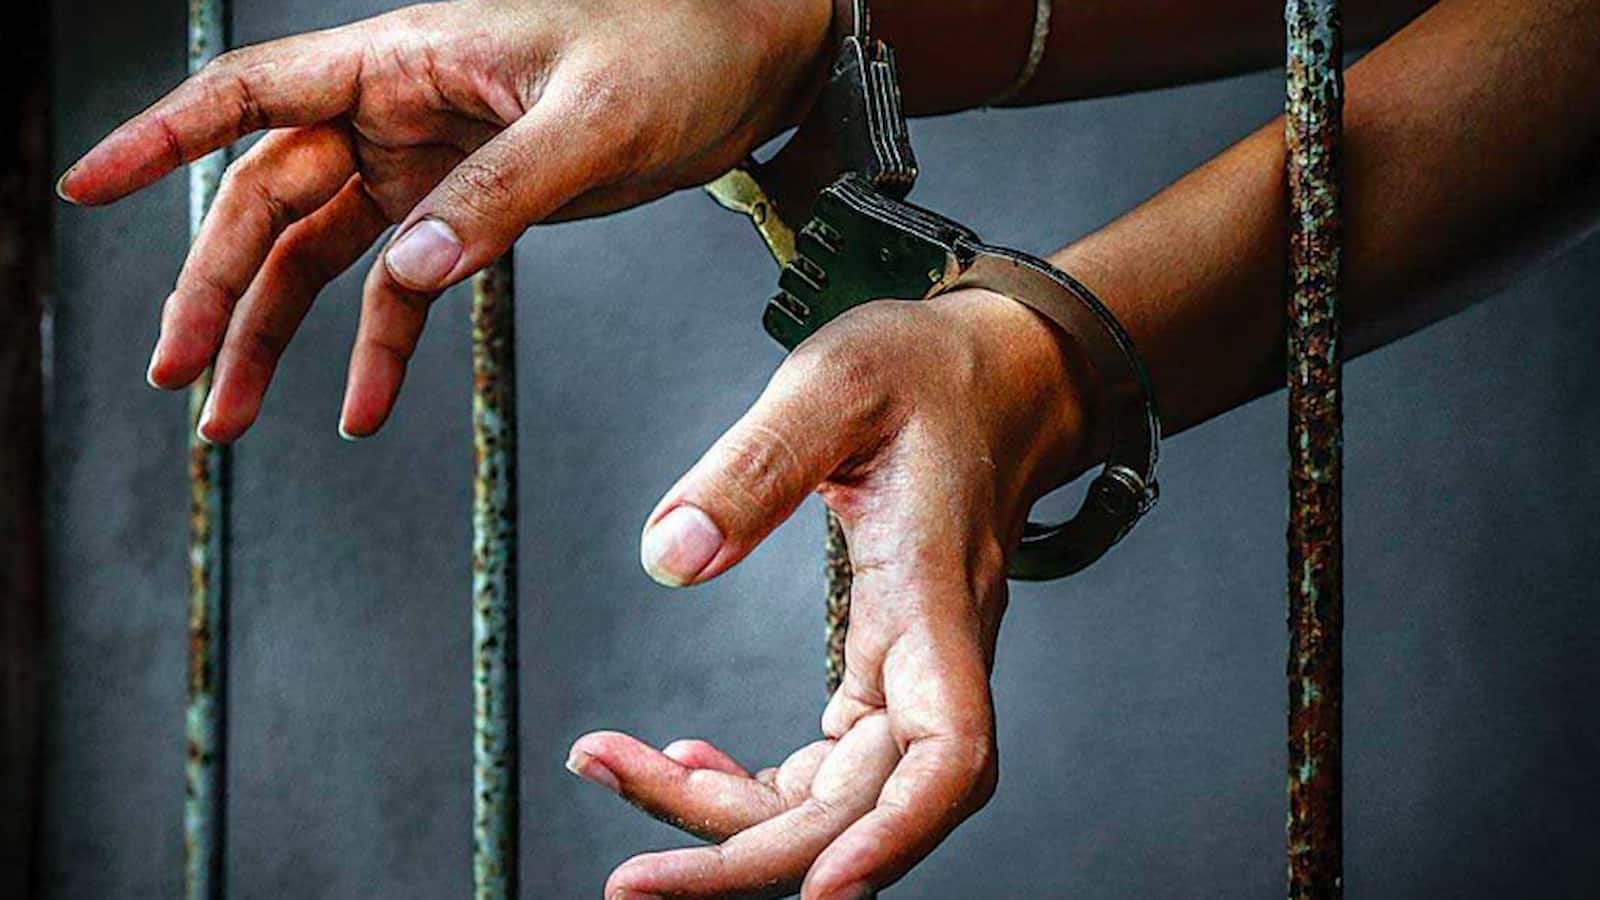 ISI, man detained for working with ISI